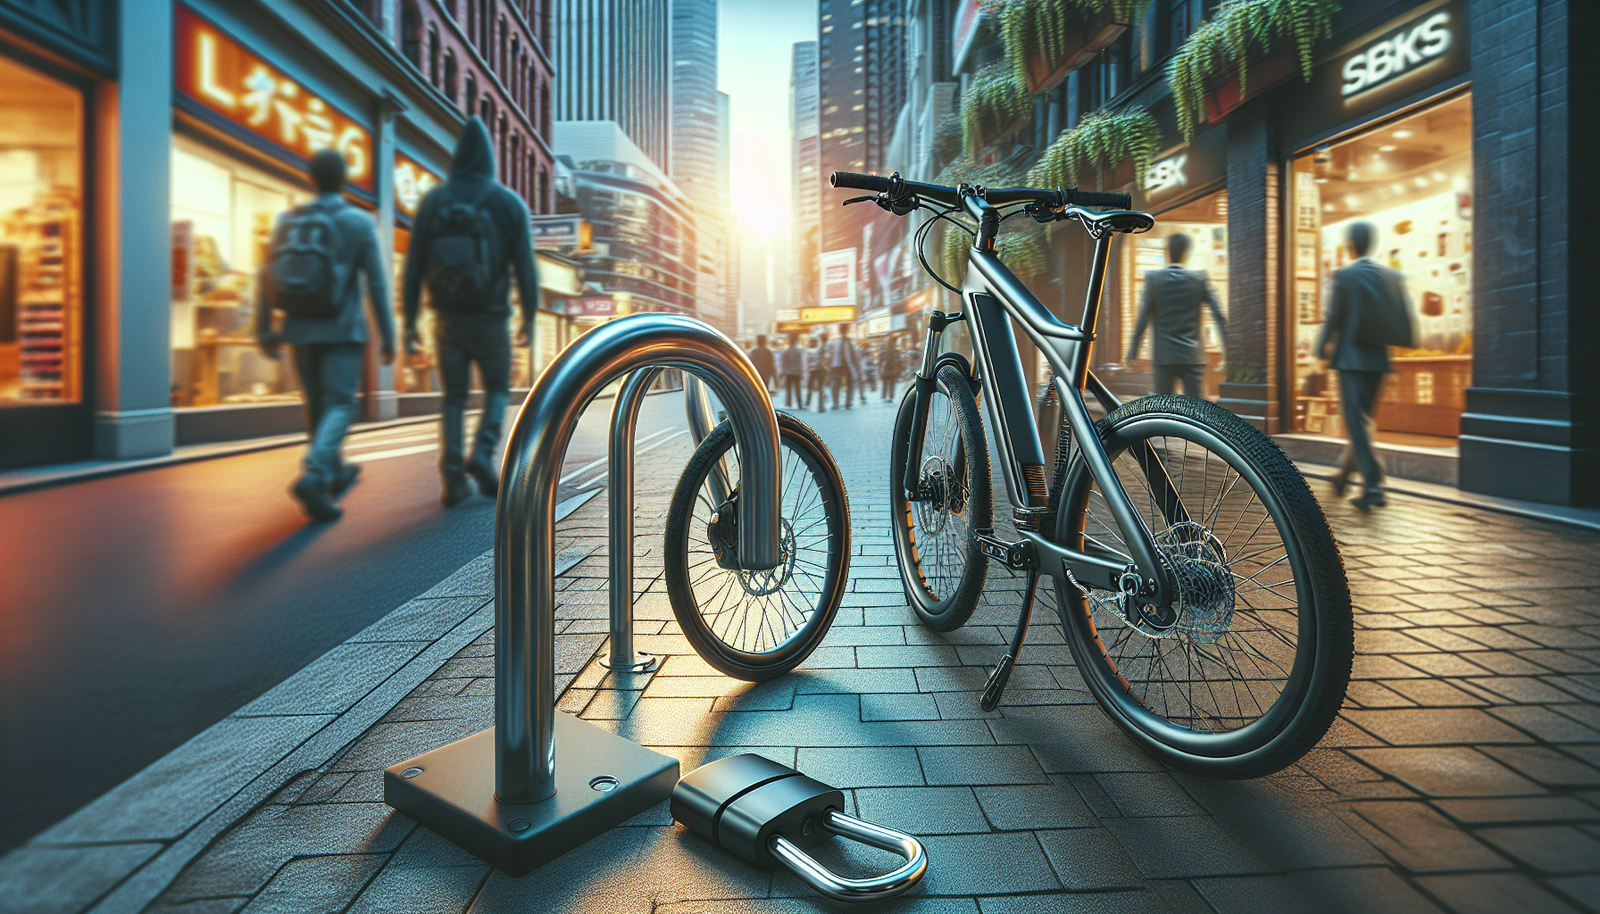 Can I Lock Up My Electric Bike Securely In Public Spaces?